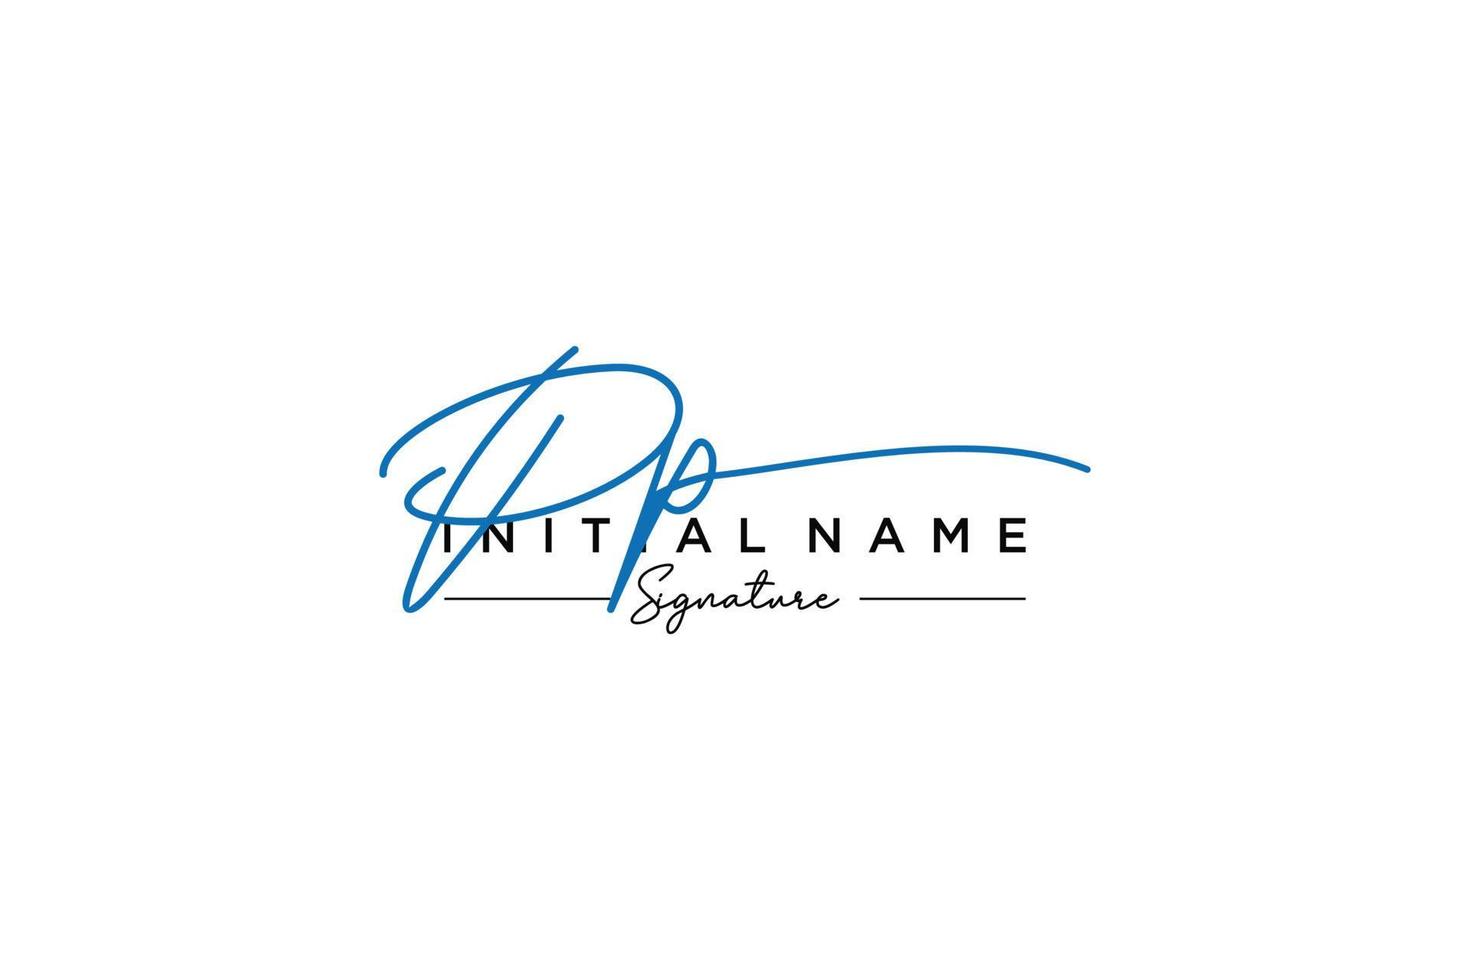 Initial PP signature logo template vector. Hand drawn Calligraphy lettering Vector illustration.